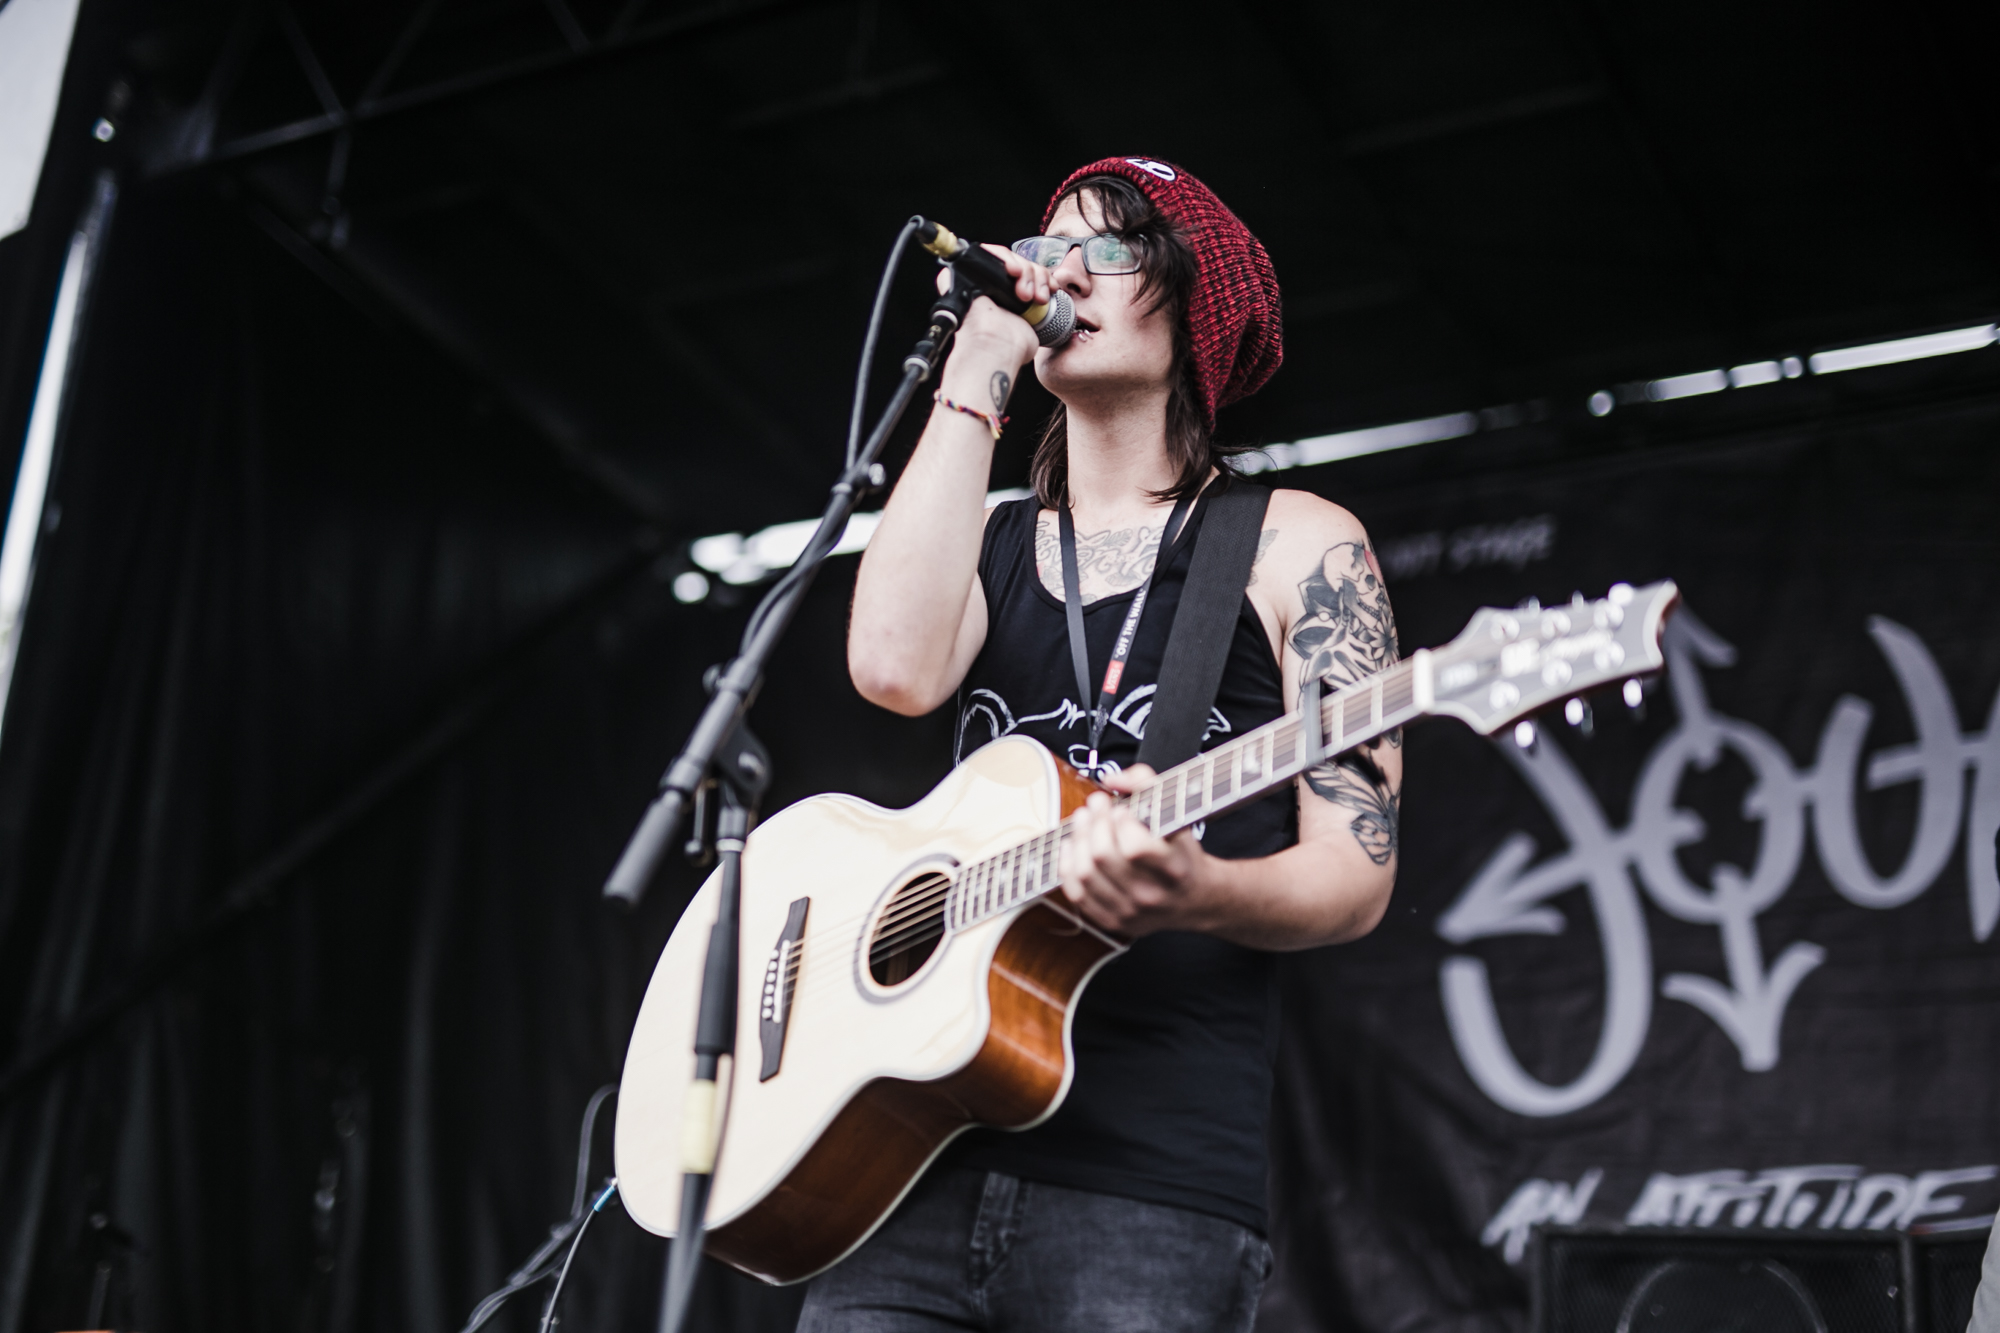 Saywecanfly